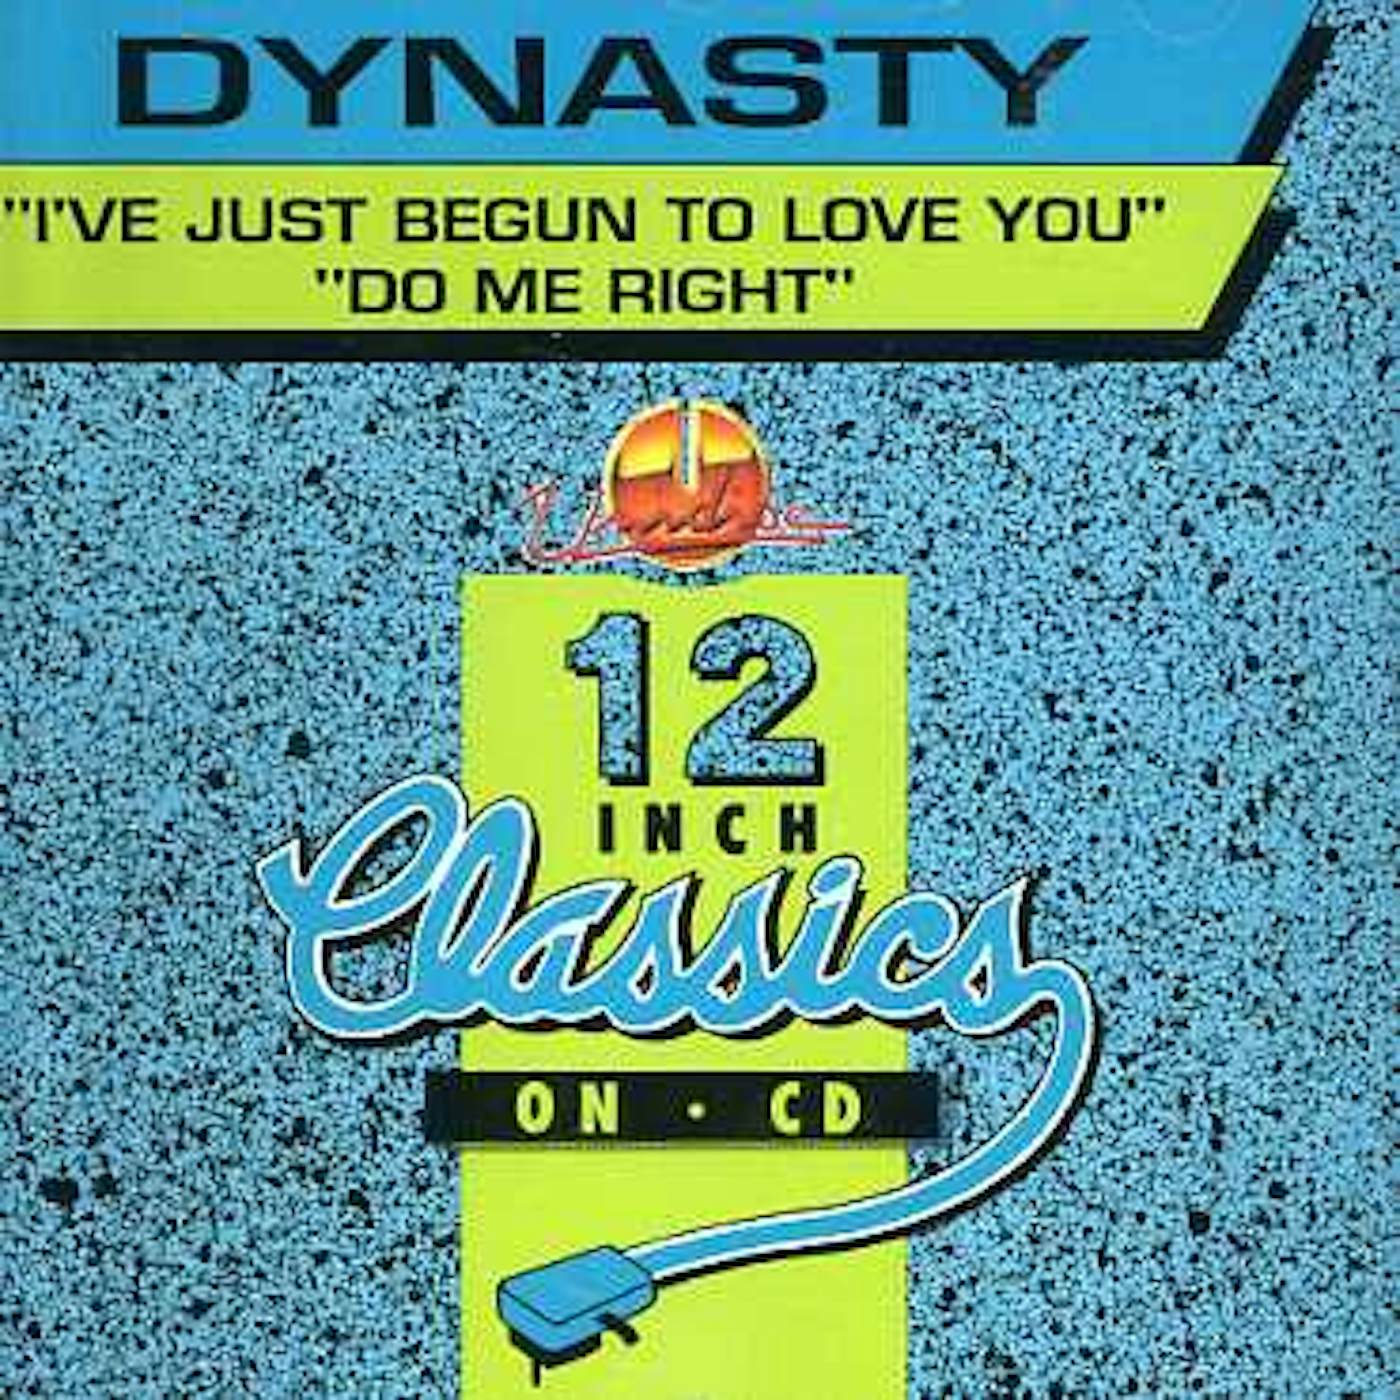 Dynasty I'VE JUST BEGUN TO LOVE YOU/DO ME RIGHT CD